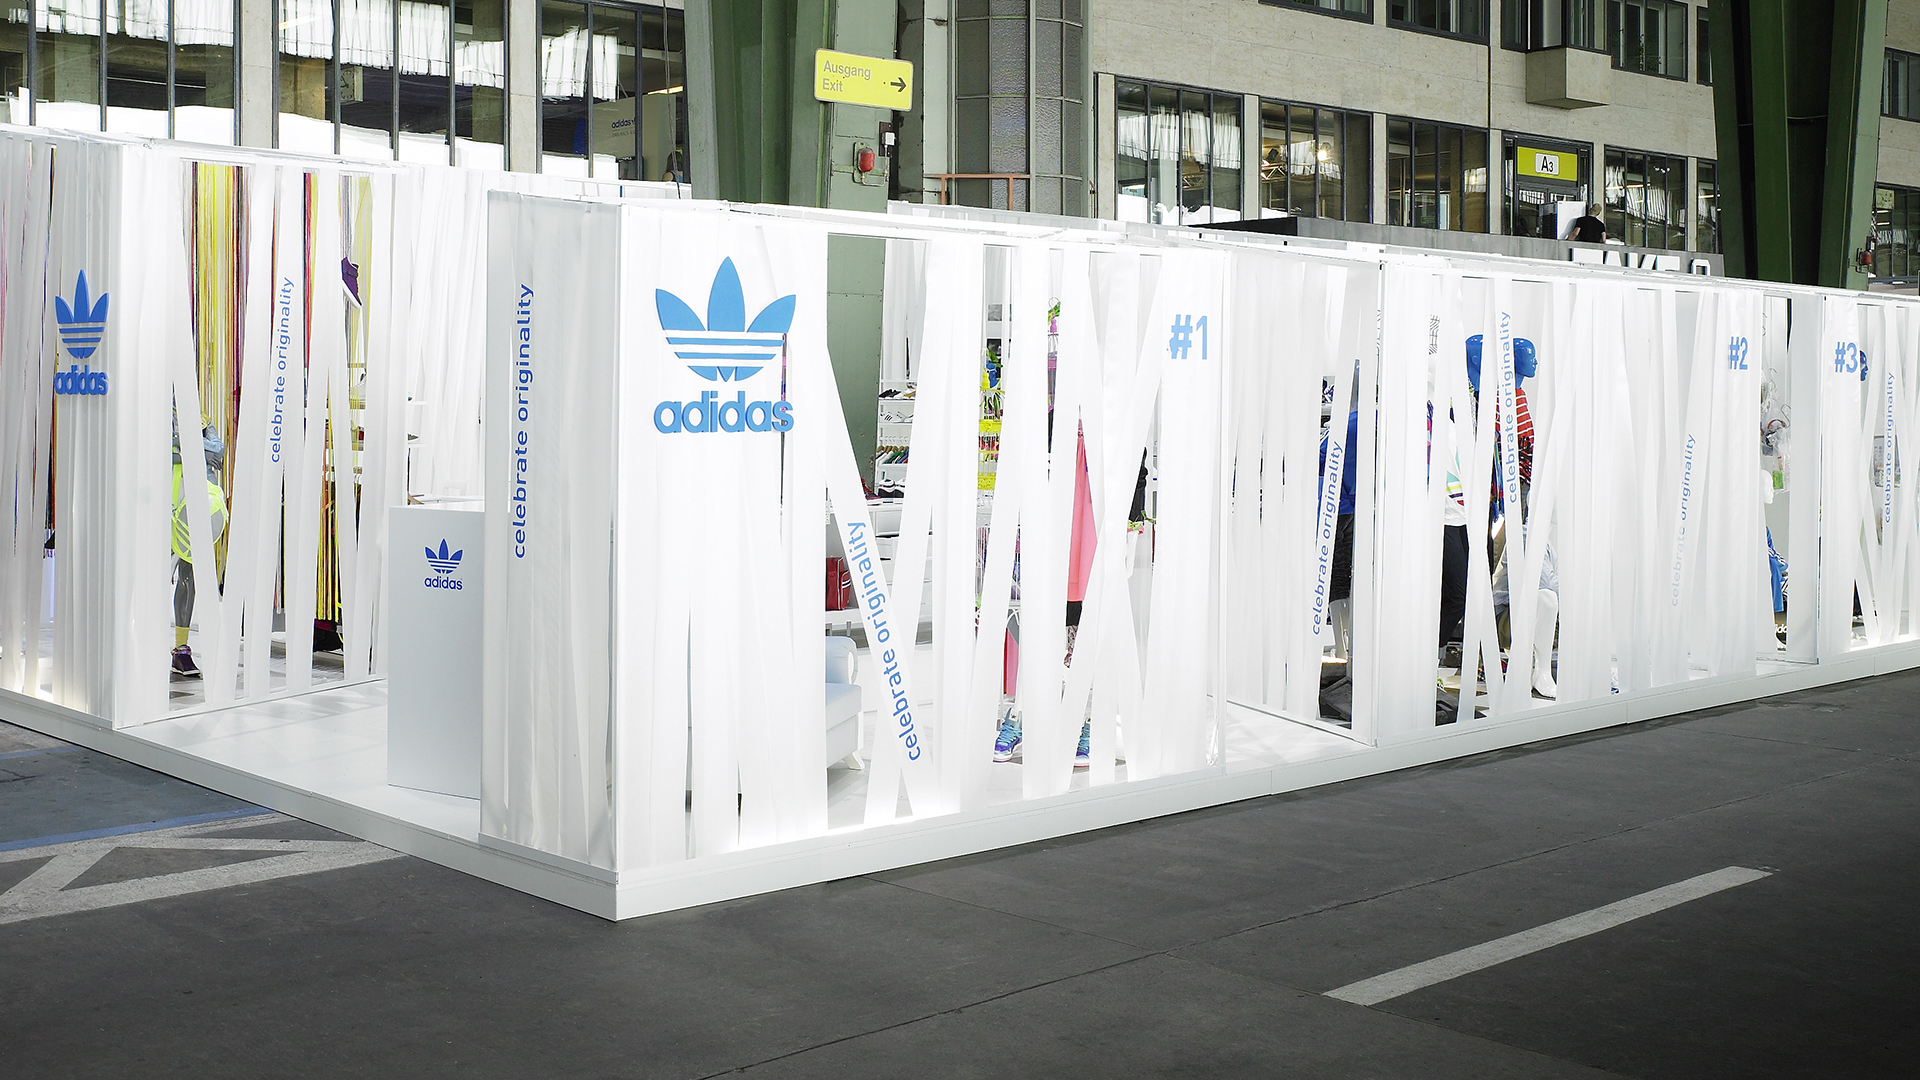 Dart stages the adidas fair stand at the B&B Sommer 2009